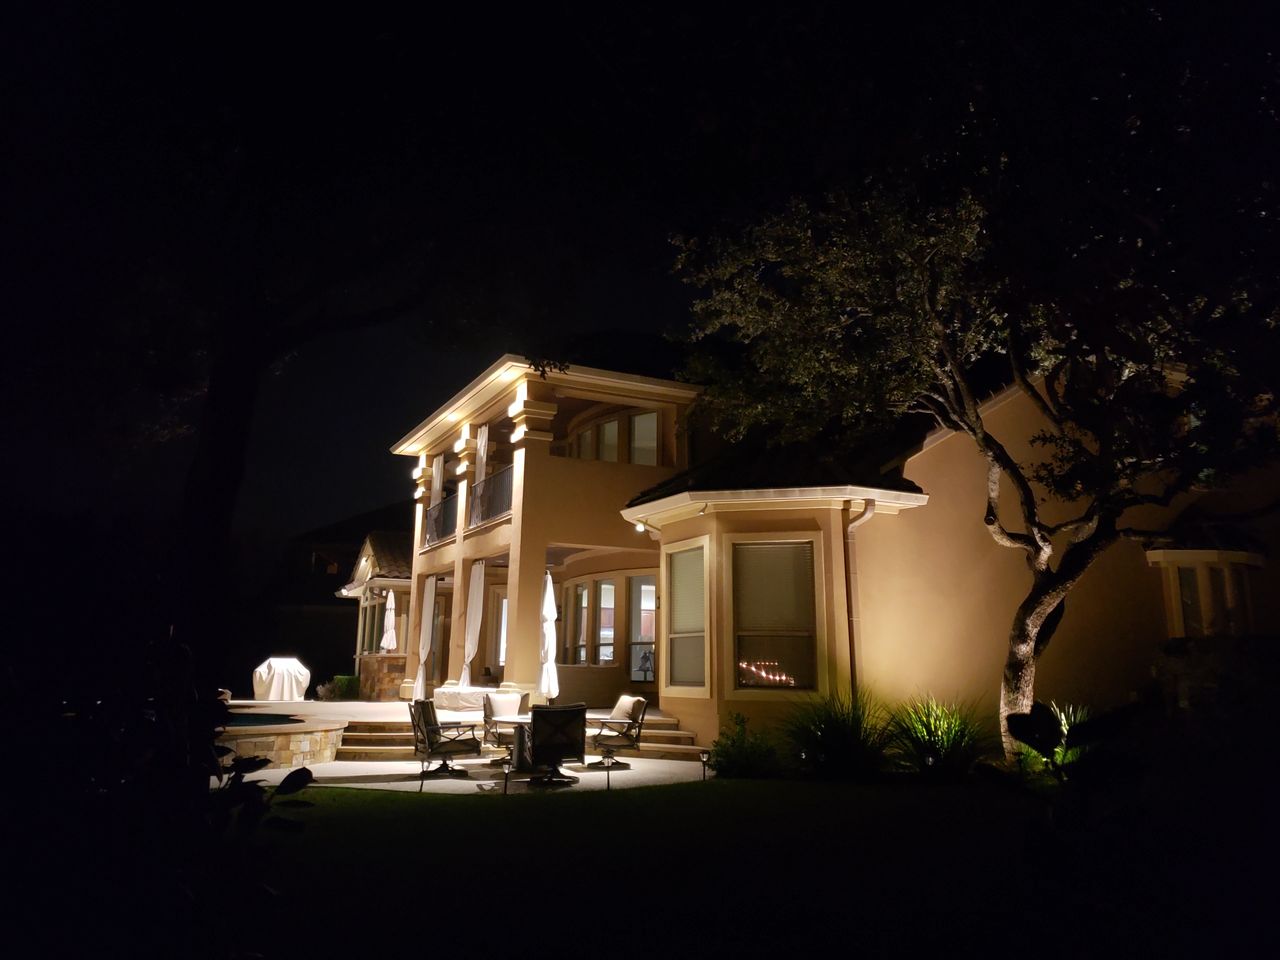 Outdoor Lighting Adds Beauty and Security